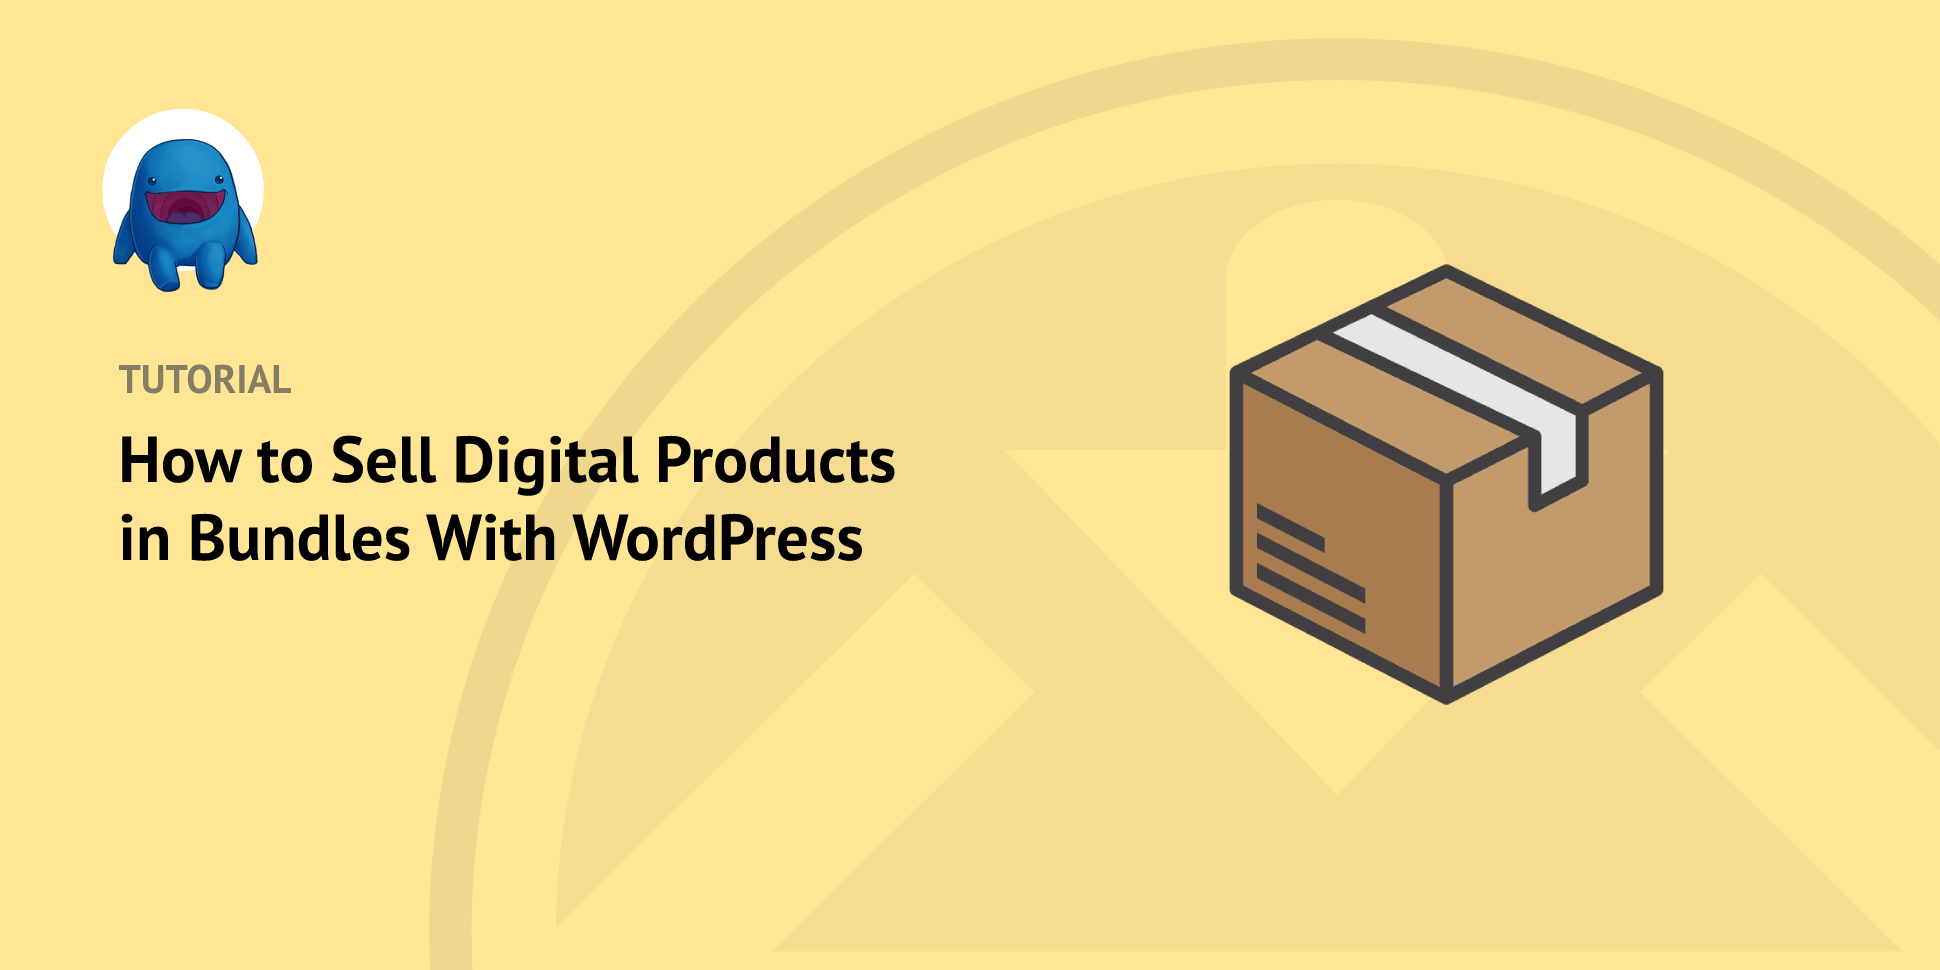 How to Sell Digital Products in Bundles With WordPress